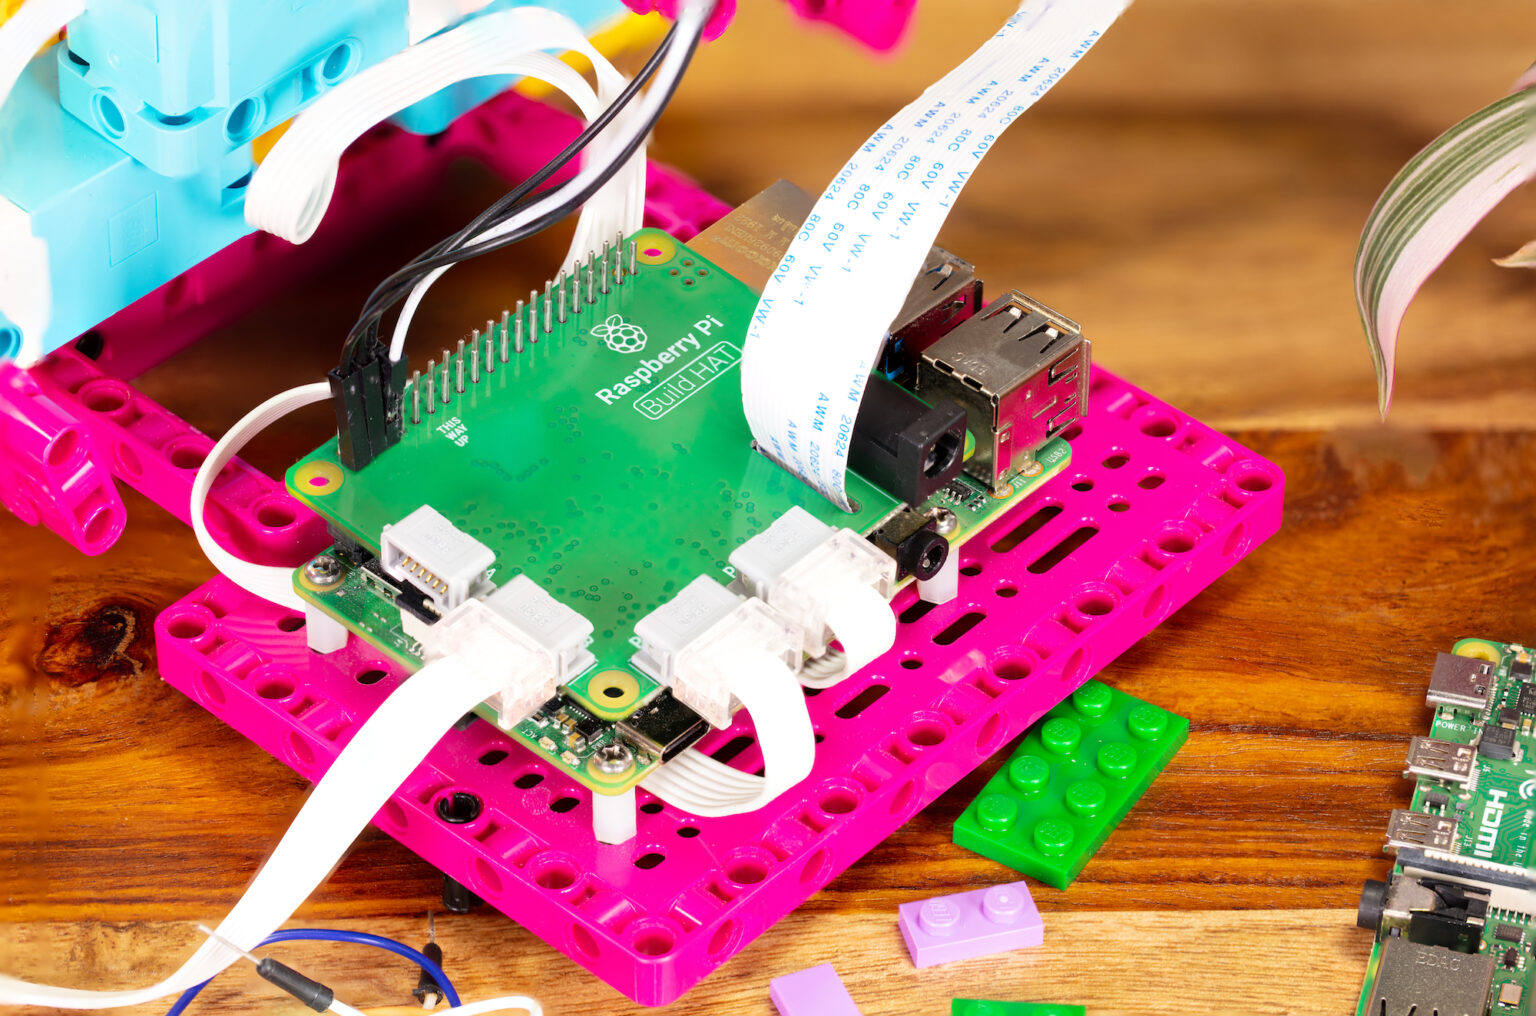 Raspberry Pi Foundation Collaborates with LEGO Education for the ALL-NEW RPi Build HAT